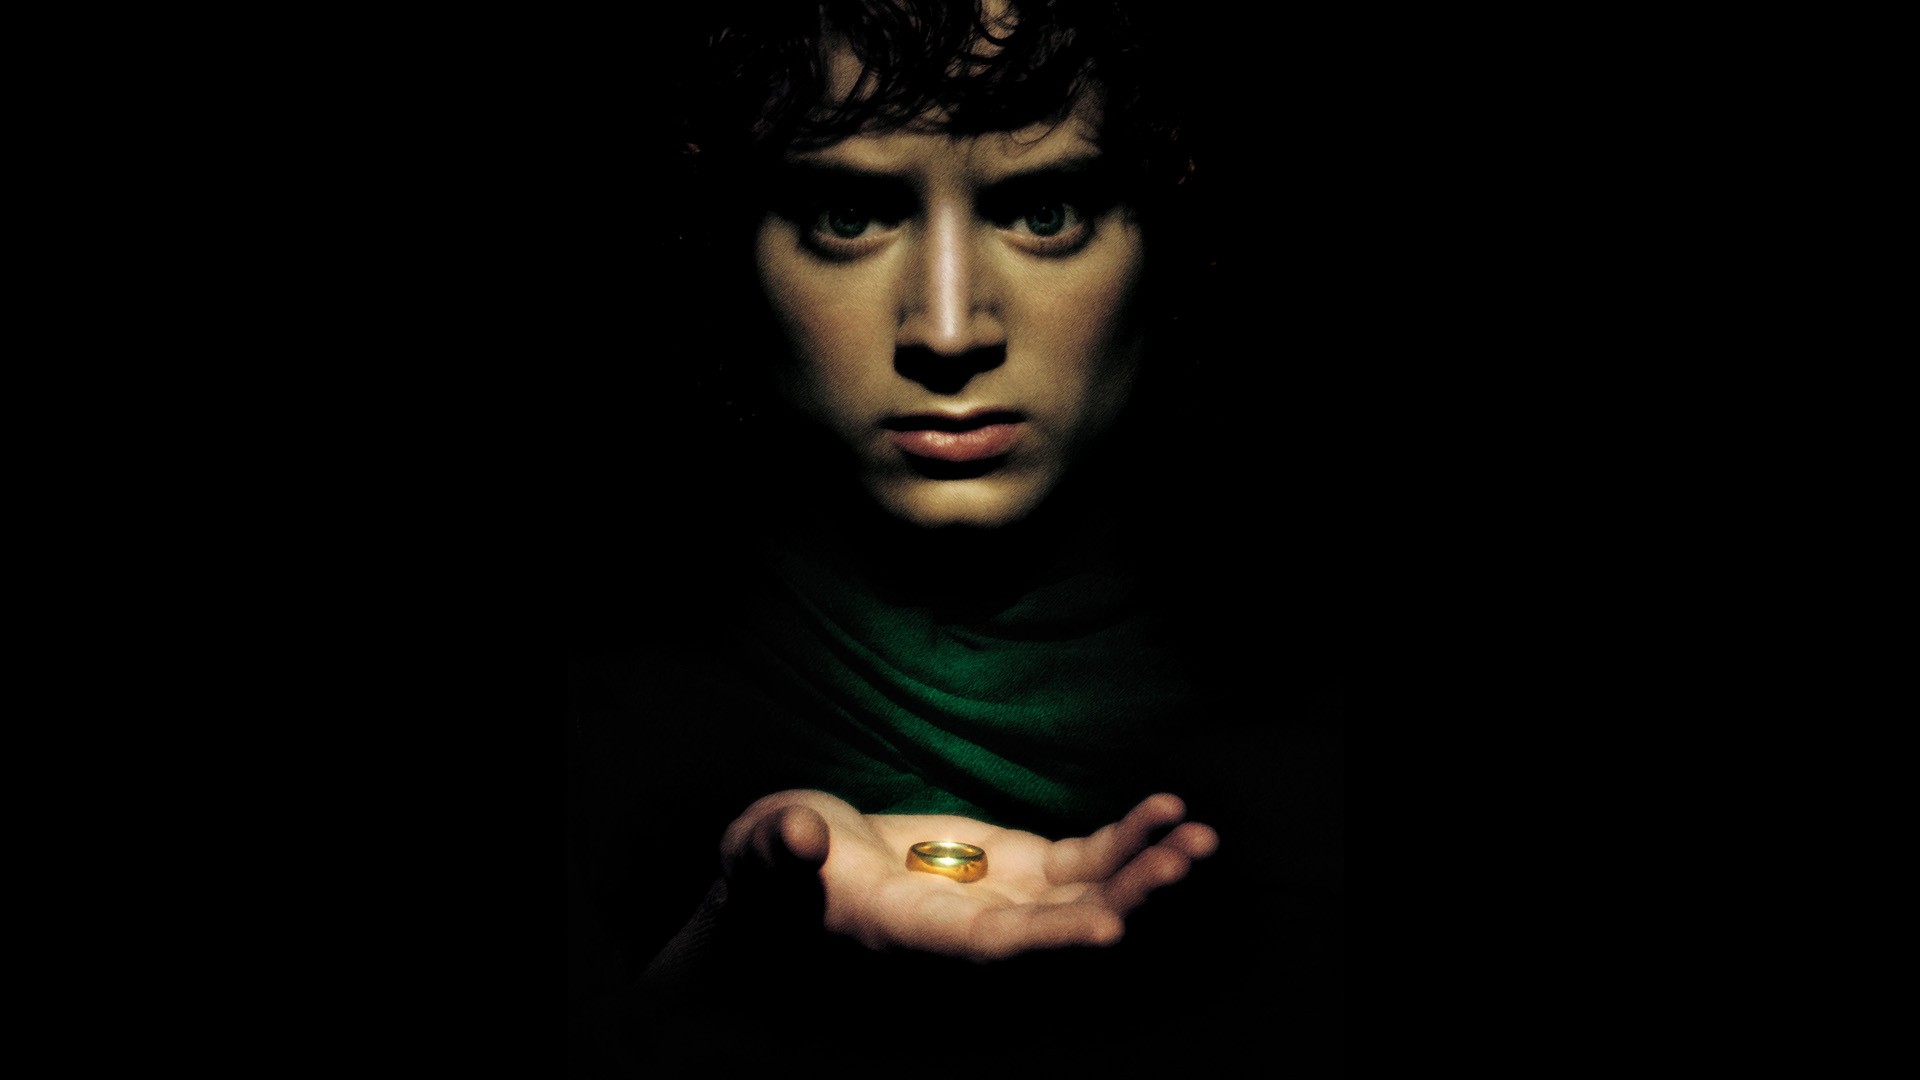 Movies The Lord Of The Rings The Lord Of The Rings The Fellowship Of The Ring Frodo Baggins Elijah W 1920x1080